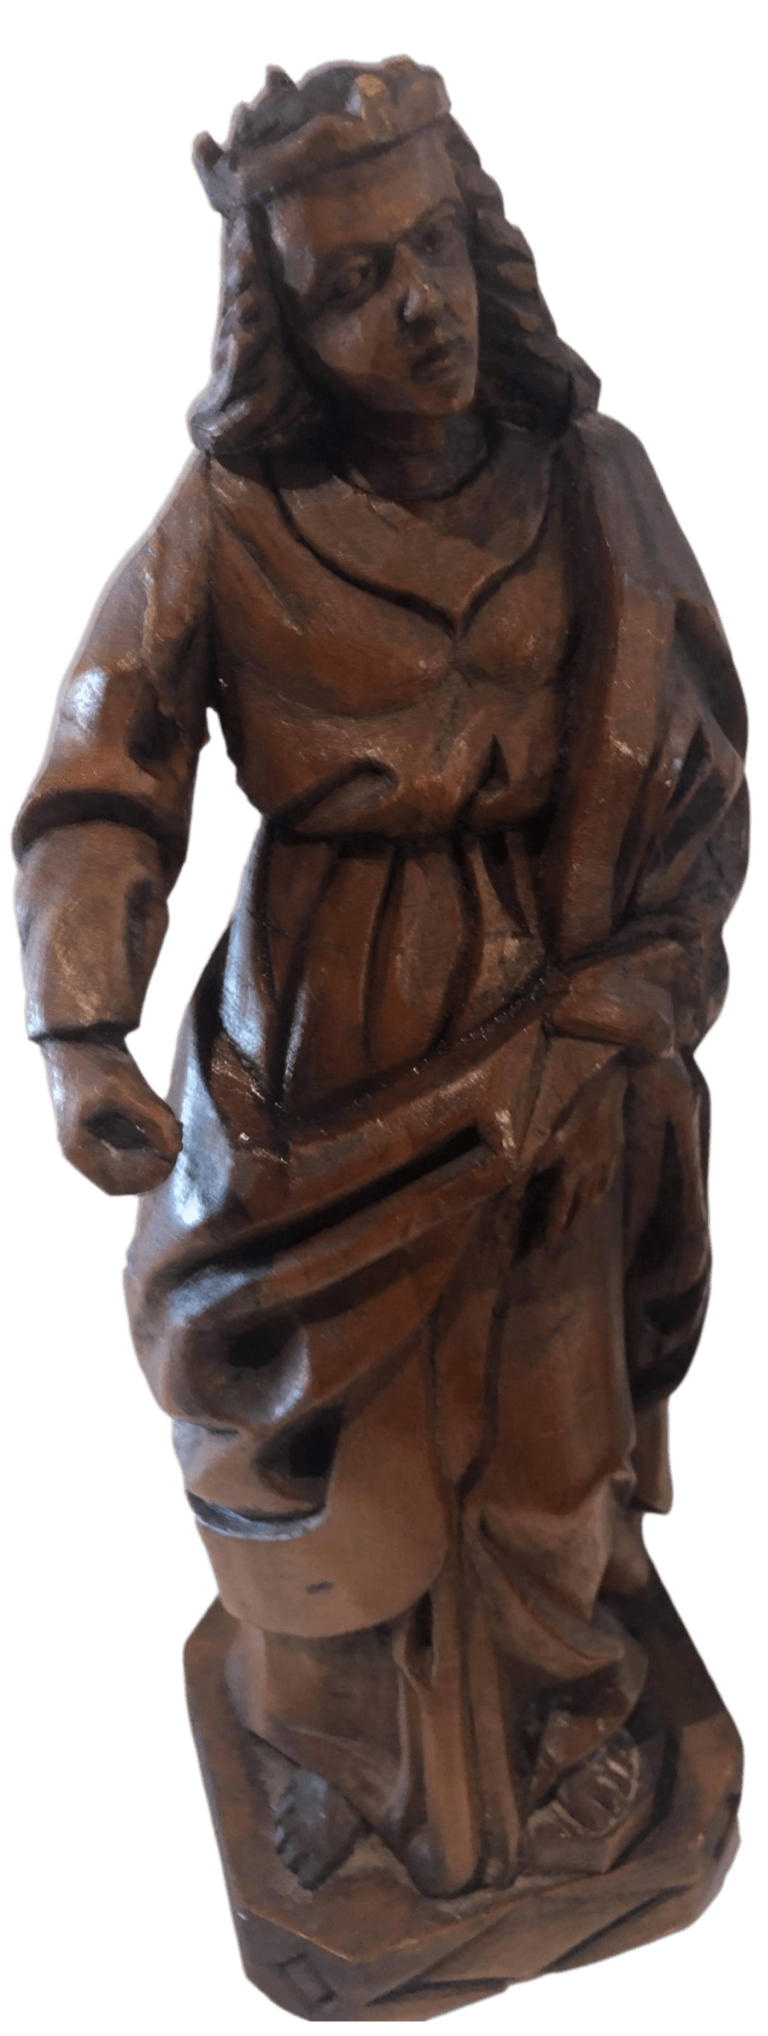 Statue Saint Barbara Wood Red Piece 11 inches tall - Ysleta Mission Gift Shop- VOTED El Paso's Best Gift Shop